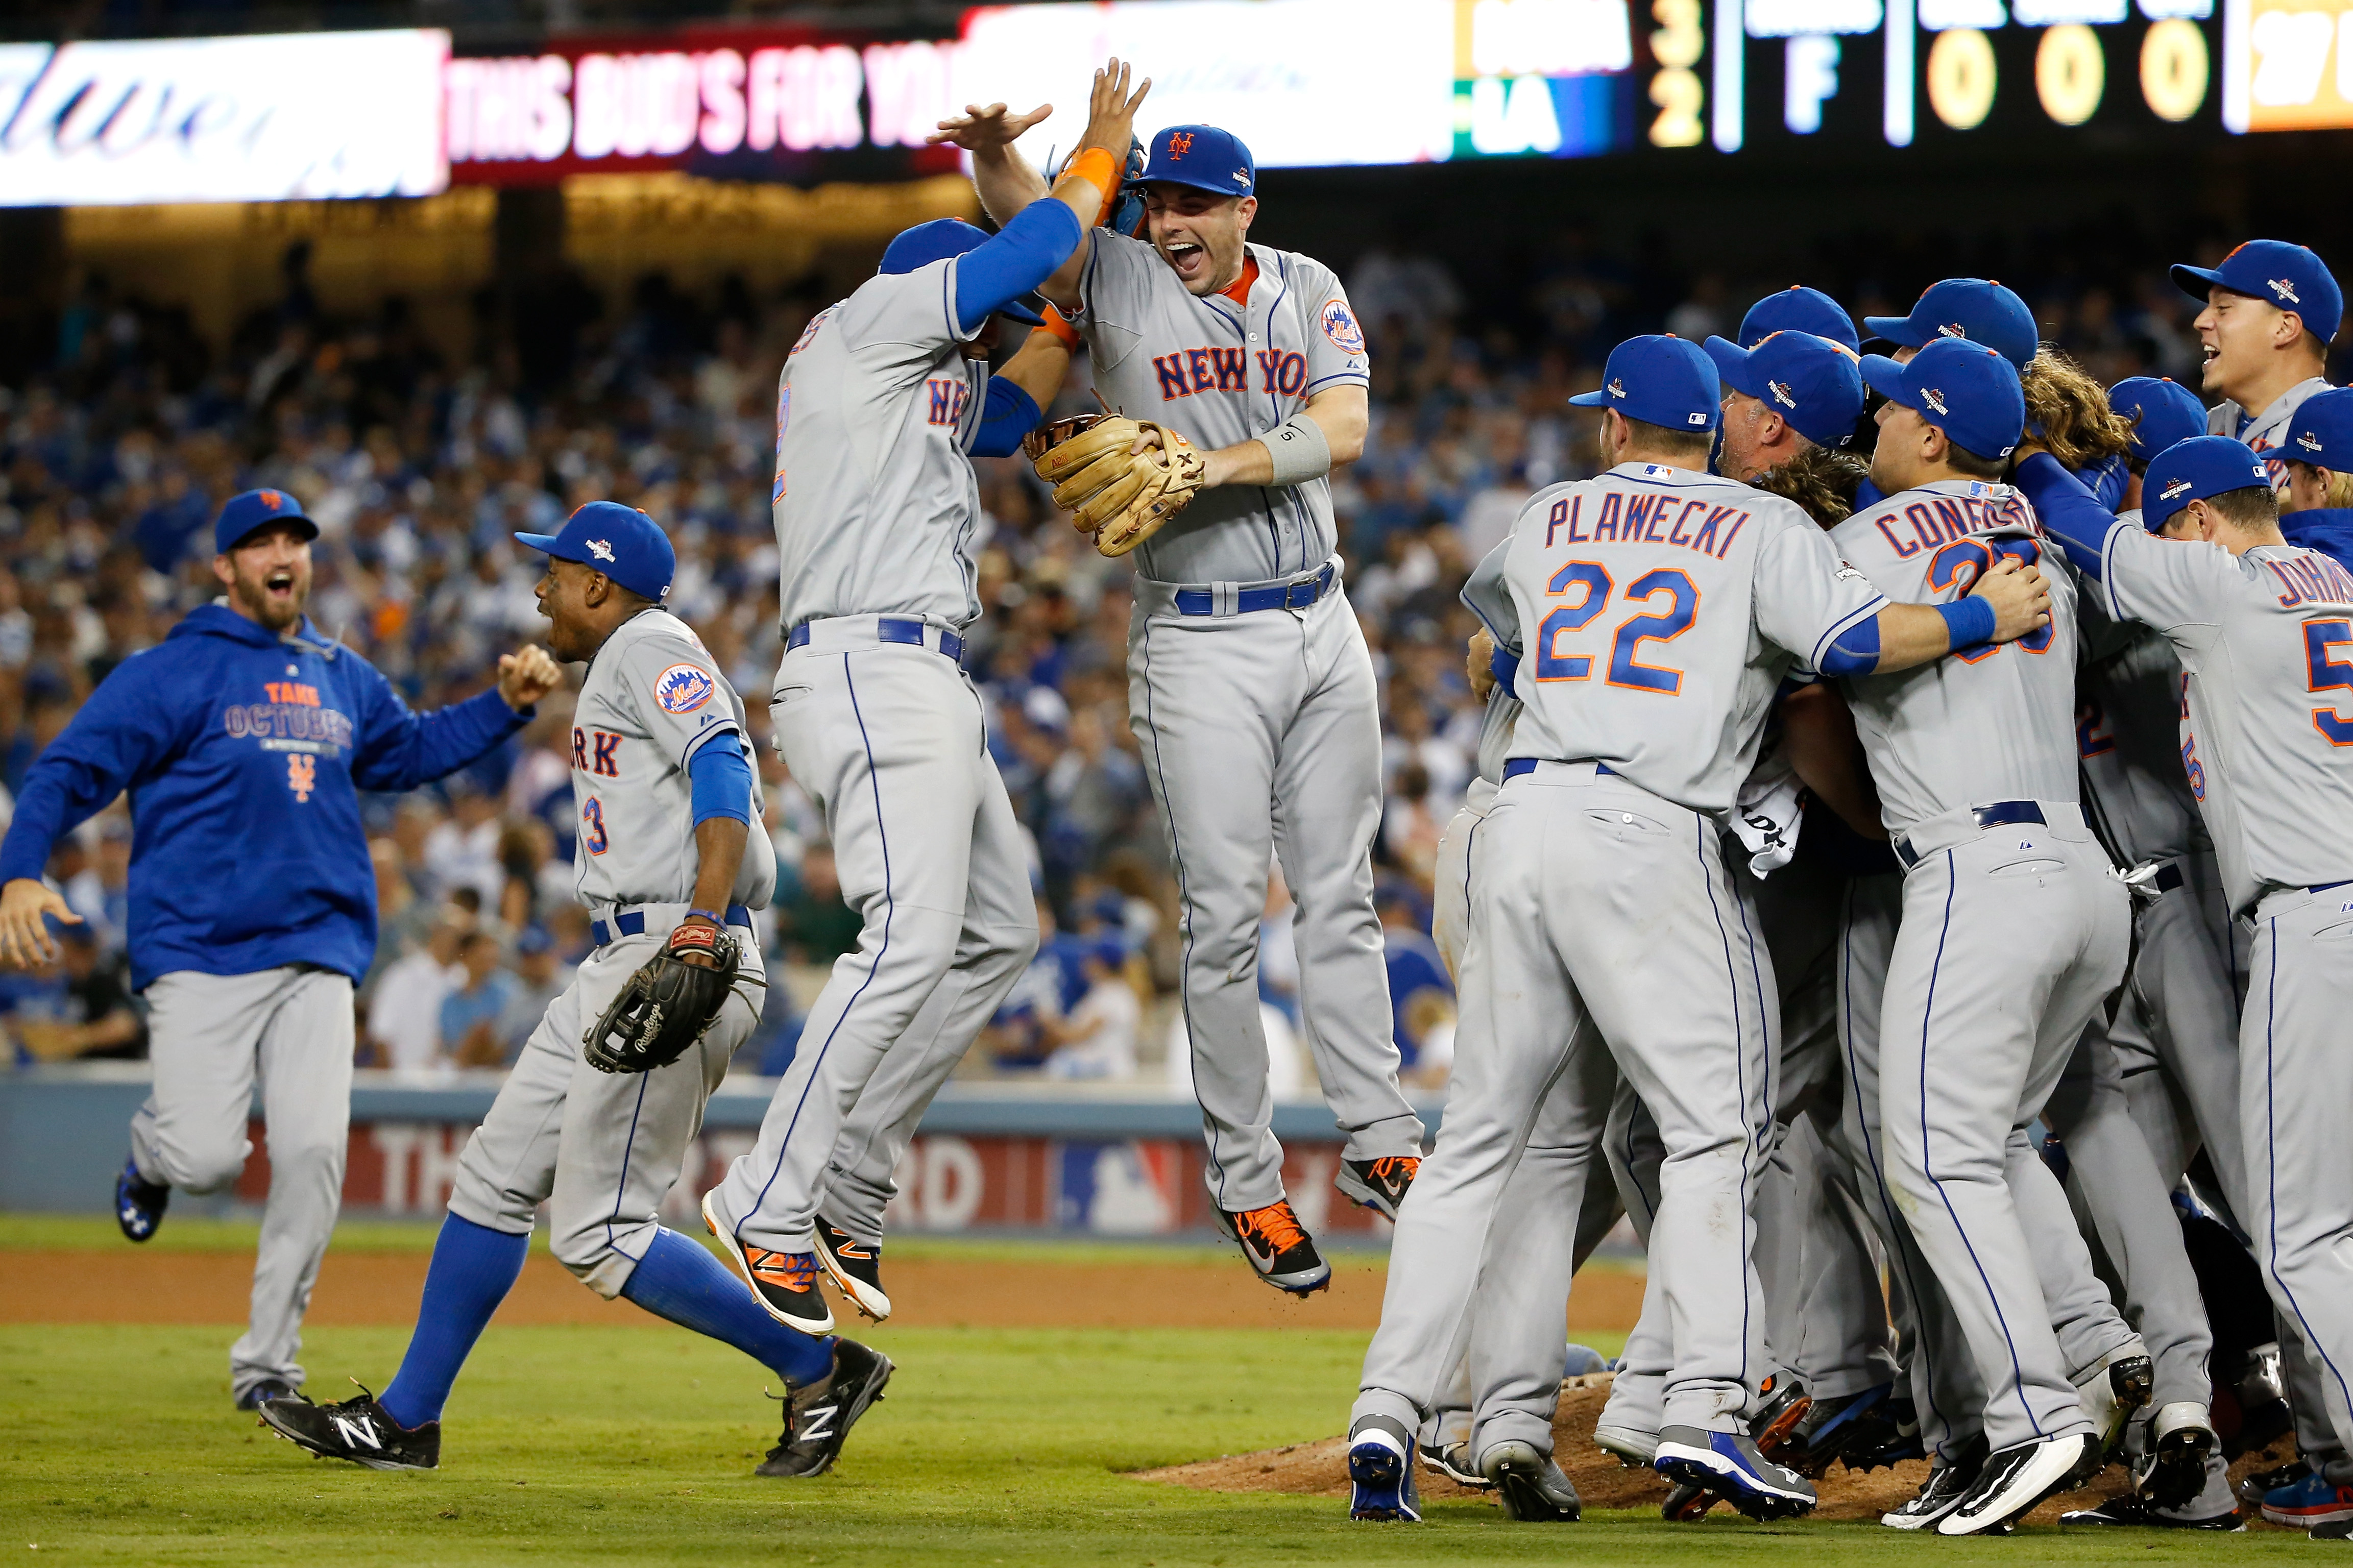 The Mets had a fantastic time celebrating their NLCS sweep